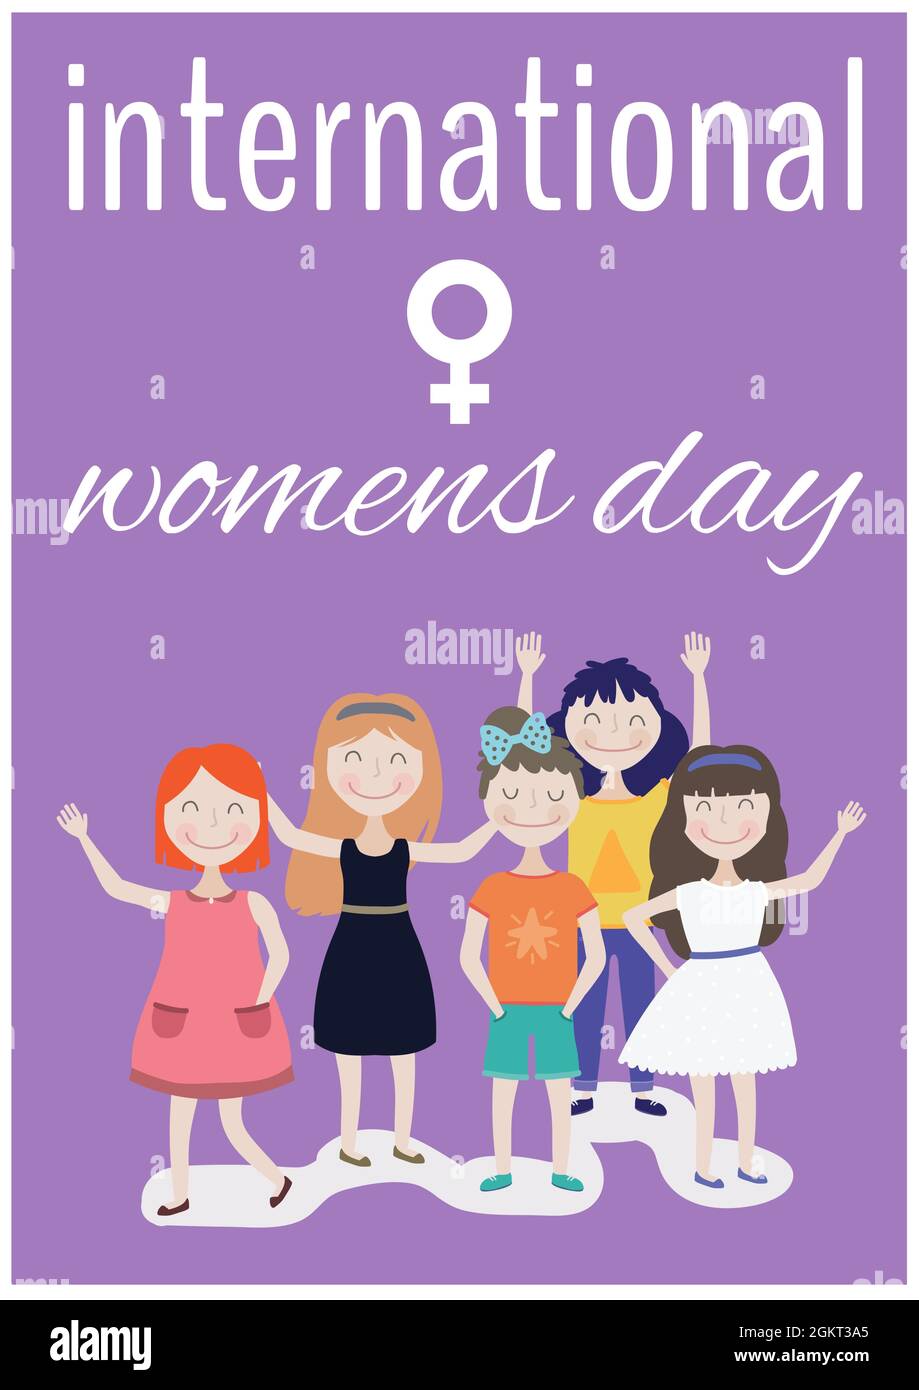 International women's day text and female gender symbol over women icons on purple background Stock Photo